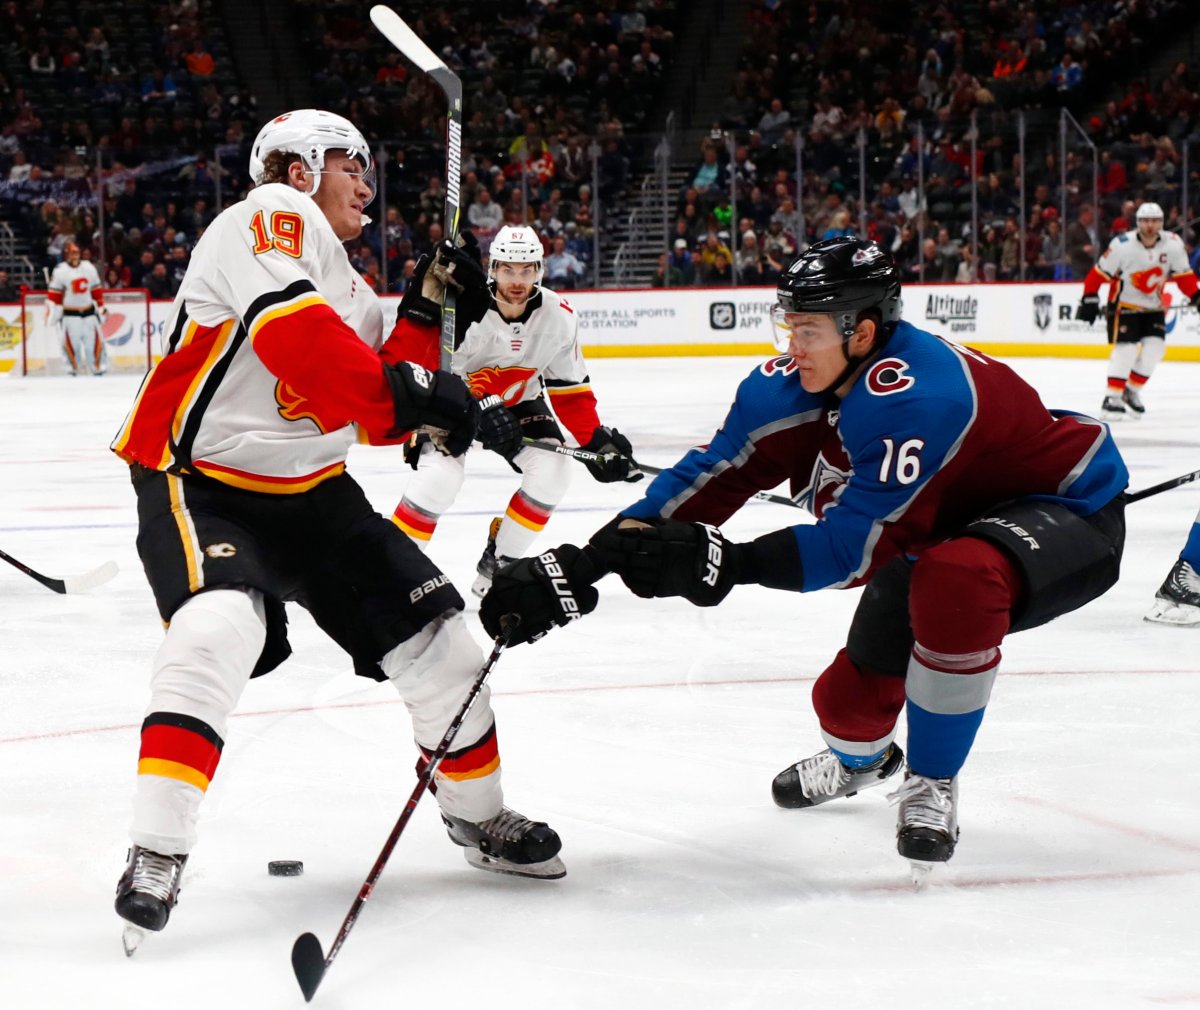 Colorado Avalanche defenseman Nikita Zadorov, right, hits Calgary Flames left wing Matthew Tkachuk as Tkachuk drives to the net with the puck during the second period of an NHL hockey game Wednesday, Feb. 28, 2018, in Denver. (AP Photo/David Zalubowski).